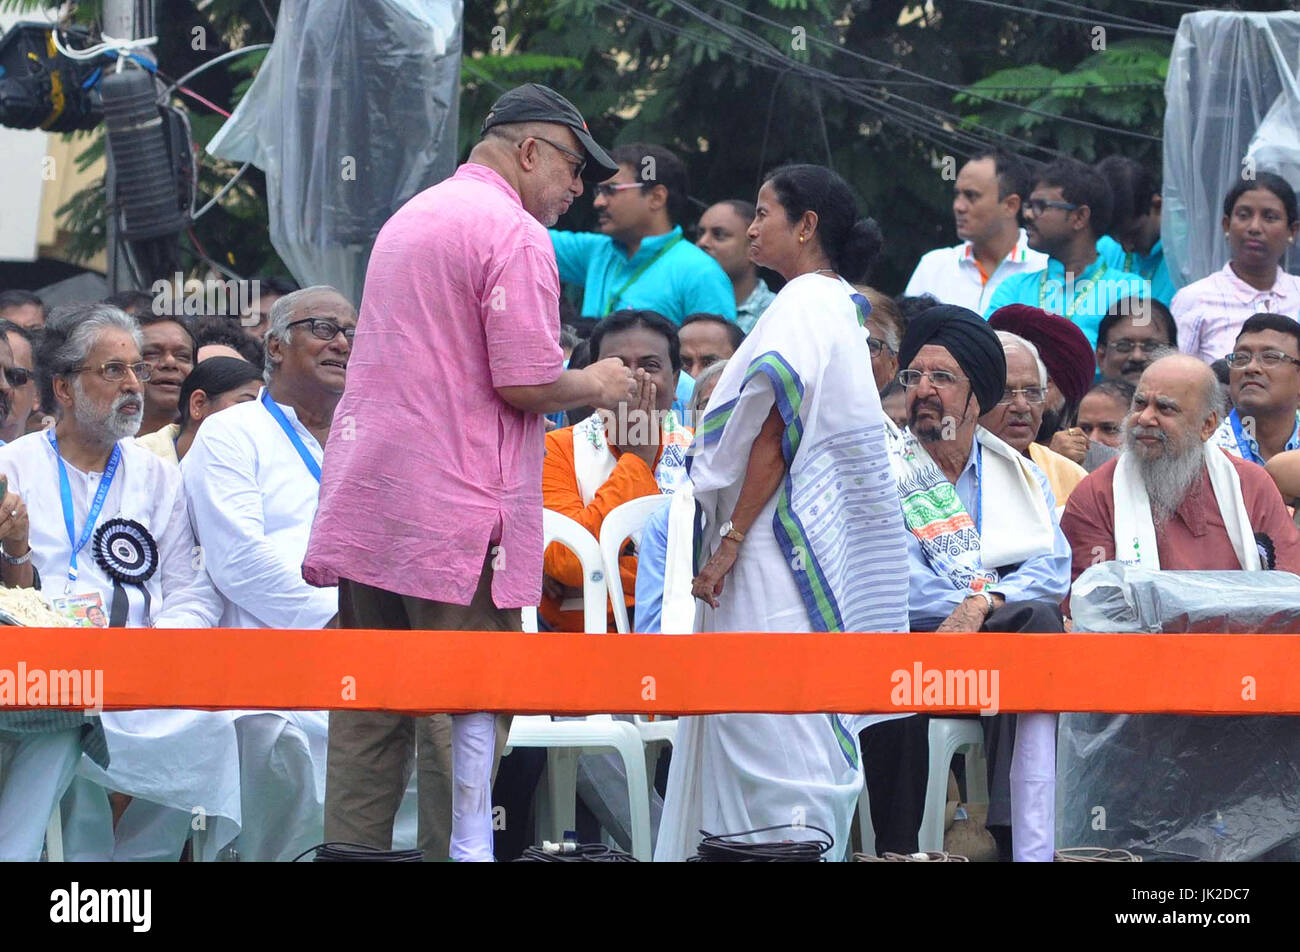 Trinamool Congress Supremo Mamata Banerjee (in right) talks with Kabir Suman (in left) the occasion of T.M.C. Martyrs Days rally in Kolkata.Under leadership of West Bengal Chief Minister and All India Trinamool Congress Supremo Mamata Banerjee TMC along with leaders and supporter from all around the country gathers to observe their Martyrs Day rally in front of Victoria House on July 21, 2017 in Kolkata. The 21 July Martyrs Day rally is annual mass rally organized by All India Trinamool Congress to commemorate the 1993 Kolkata firing where 13 people shot by police during the rally organized by Stock Photo